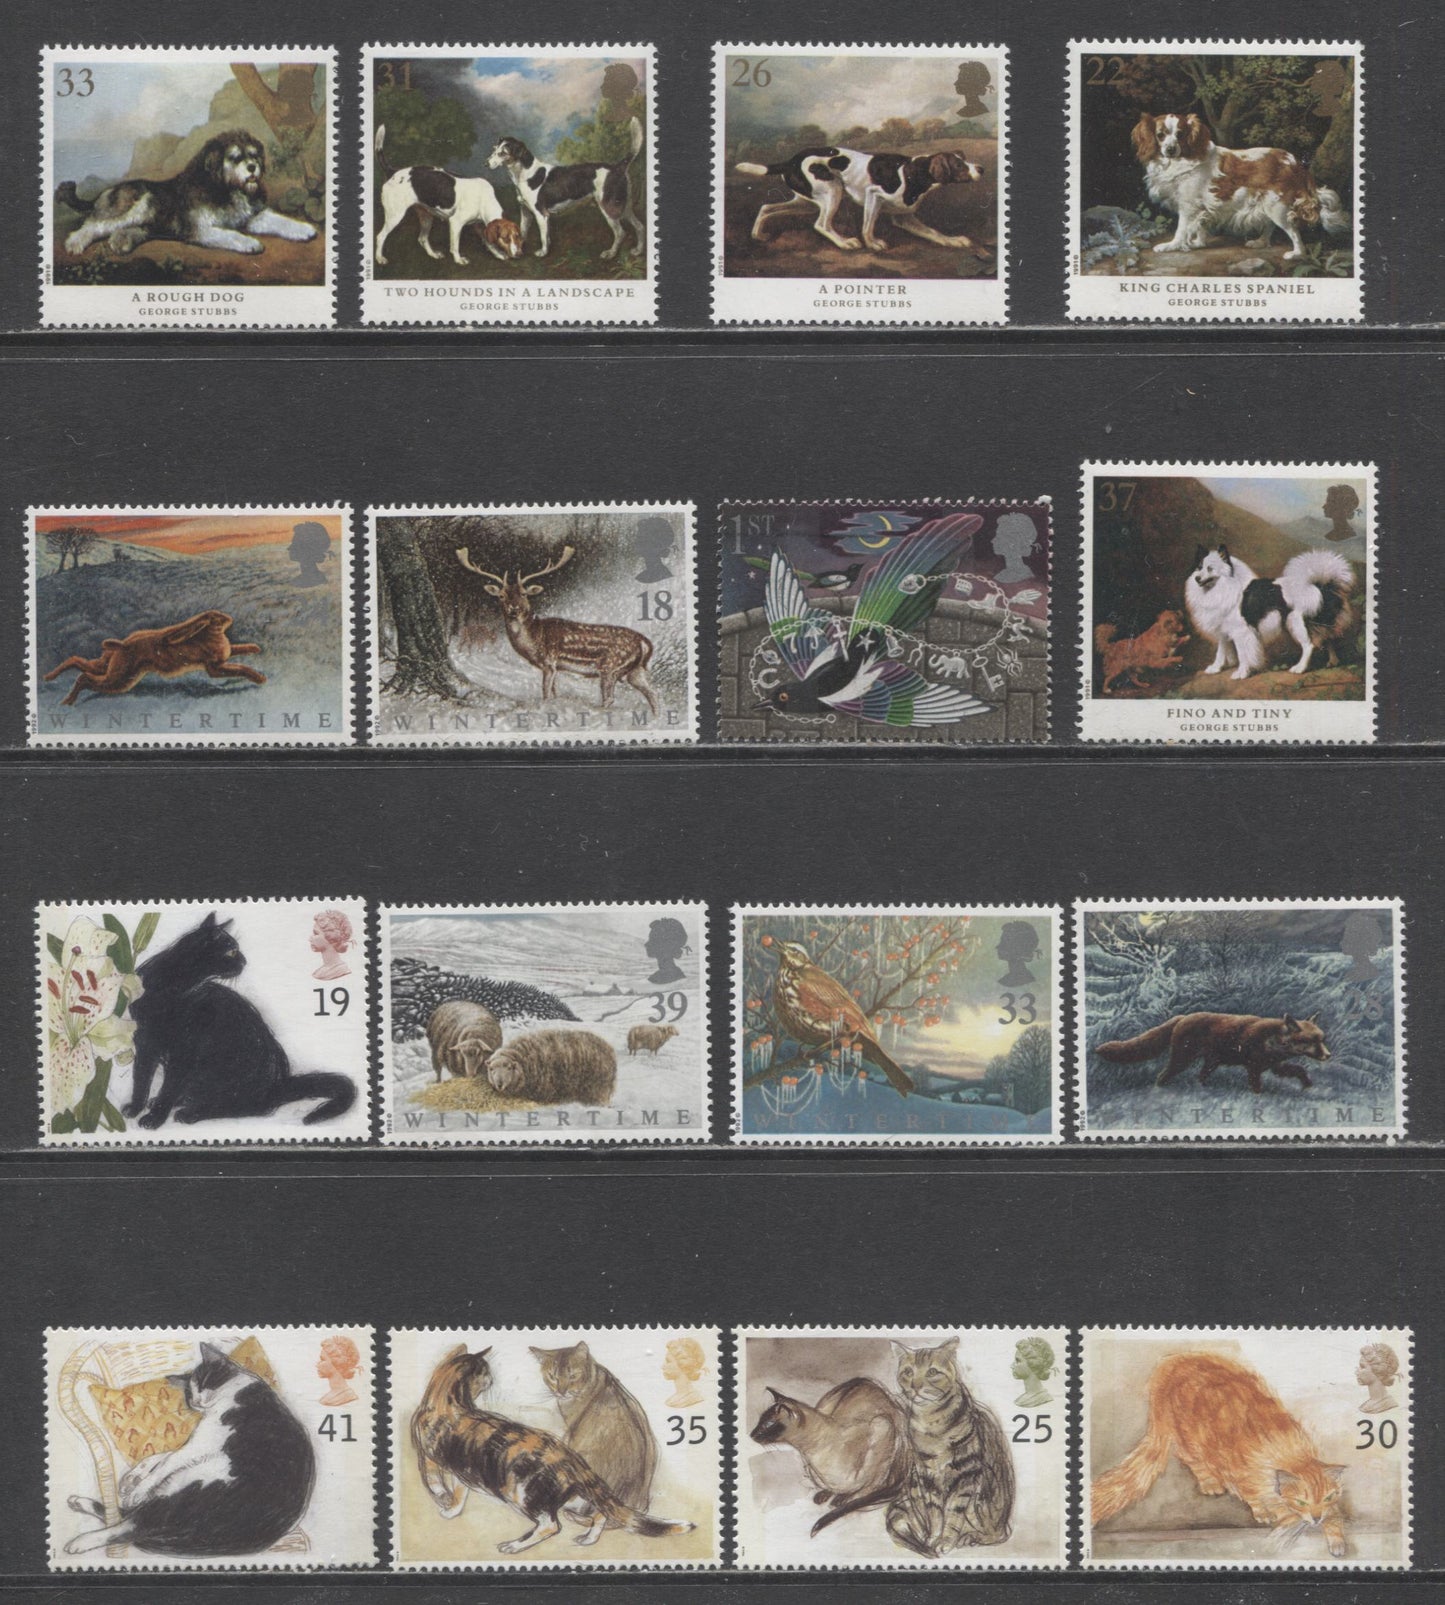 Lot 18 Great Britain SC#1345/1590 1991-1995 Dogs, Symbols Of Good Luck, Animals In Winter & Cats Issues, 16 VFNH/OG Singles, Click on Listing to See ALL Pictures, 2017 Scott Cat. $18.5